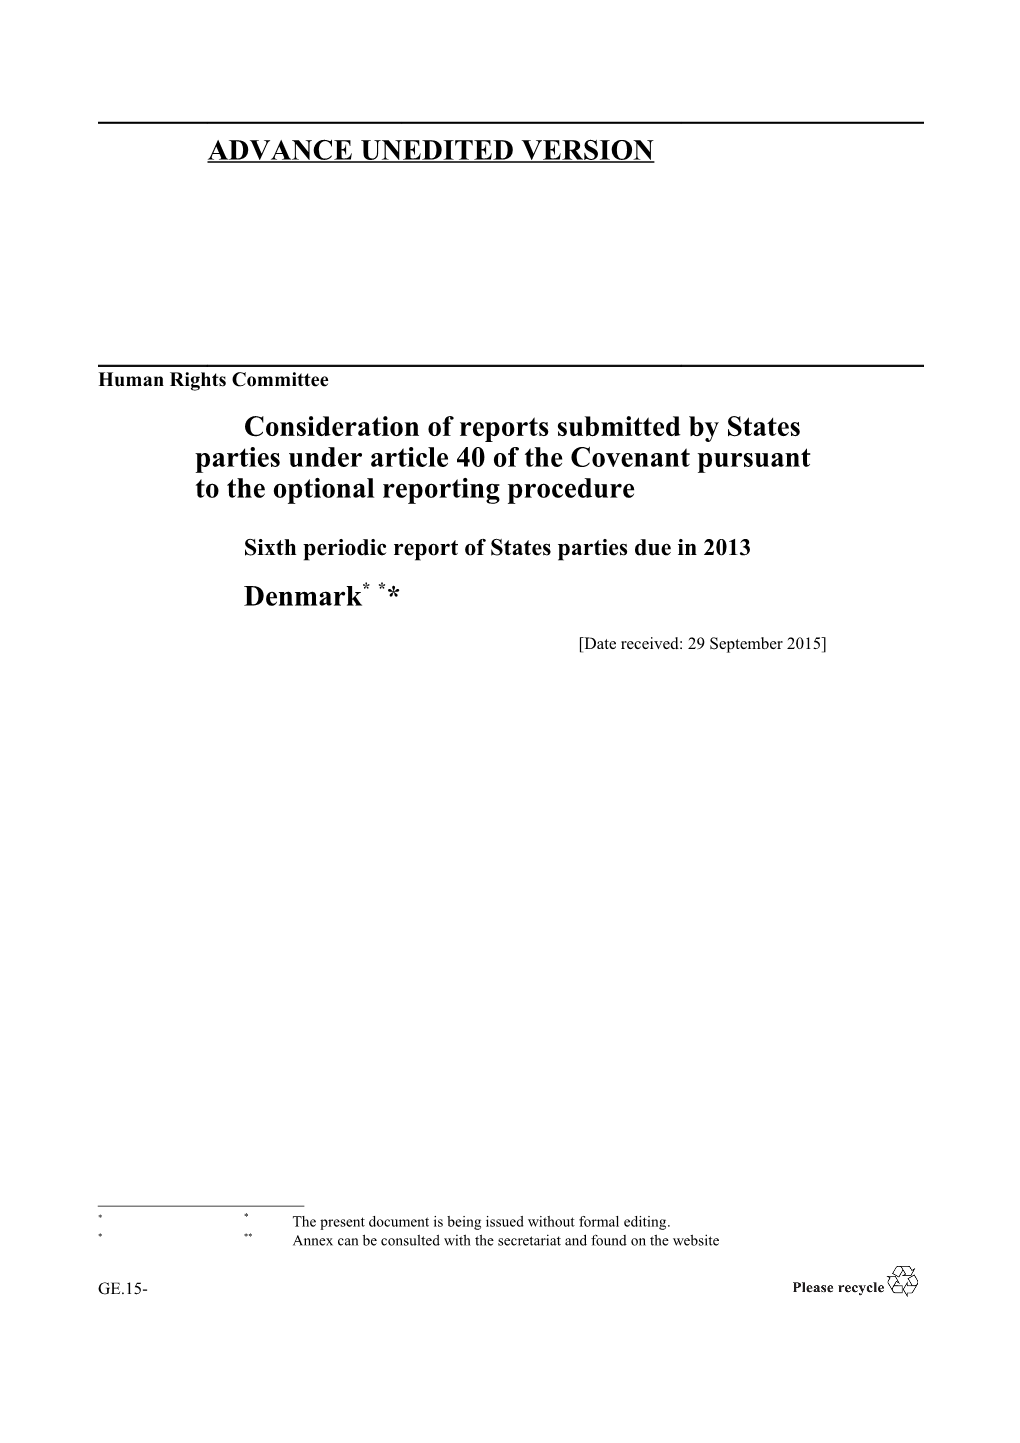 Sixth Periodic Report of States Parties Due in 2013